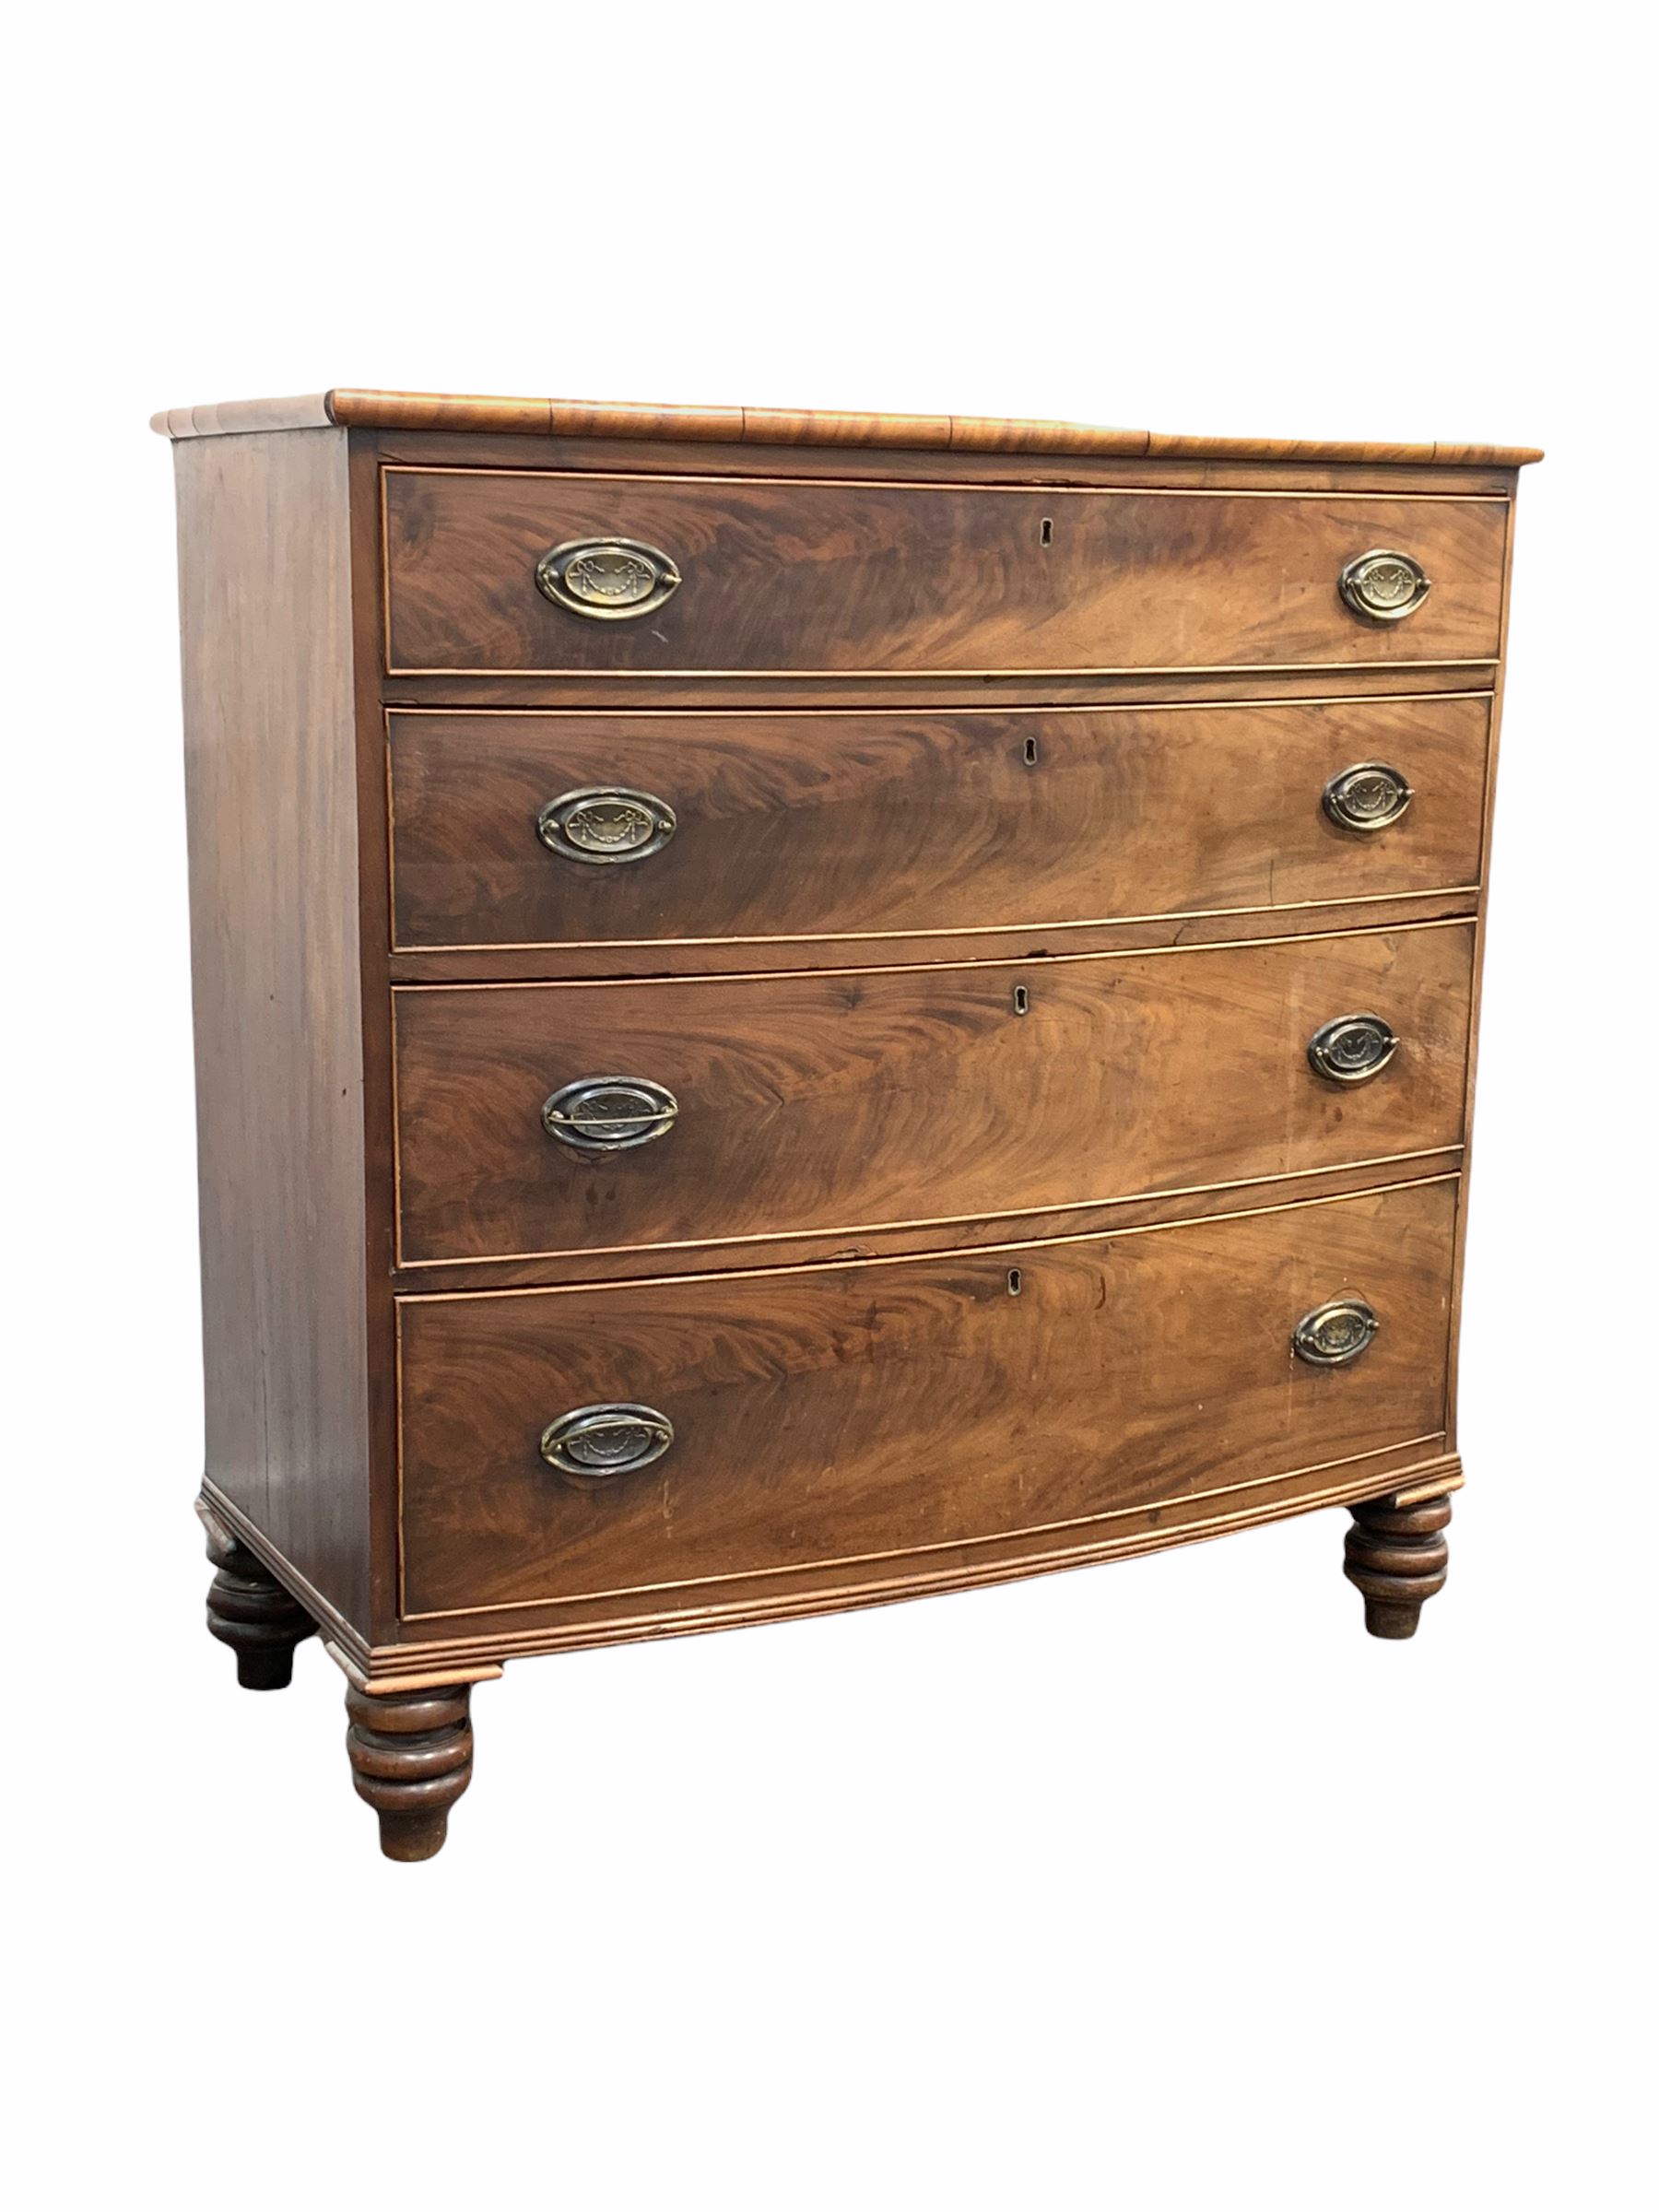 Mid 19th century mahogany bow front chest of drawers with four graduated drawers - Image 2 of 4